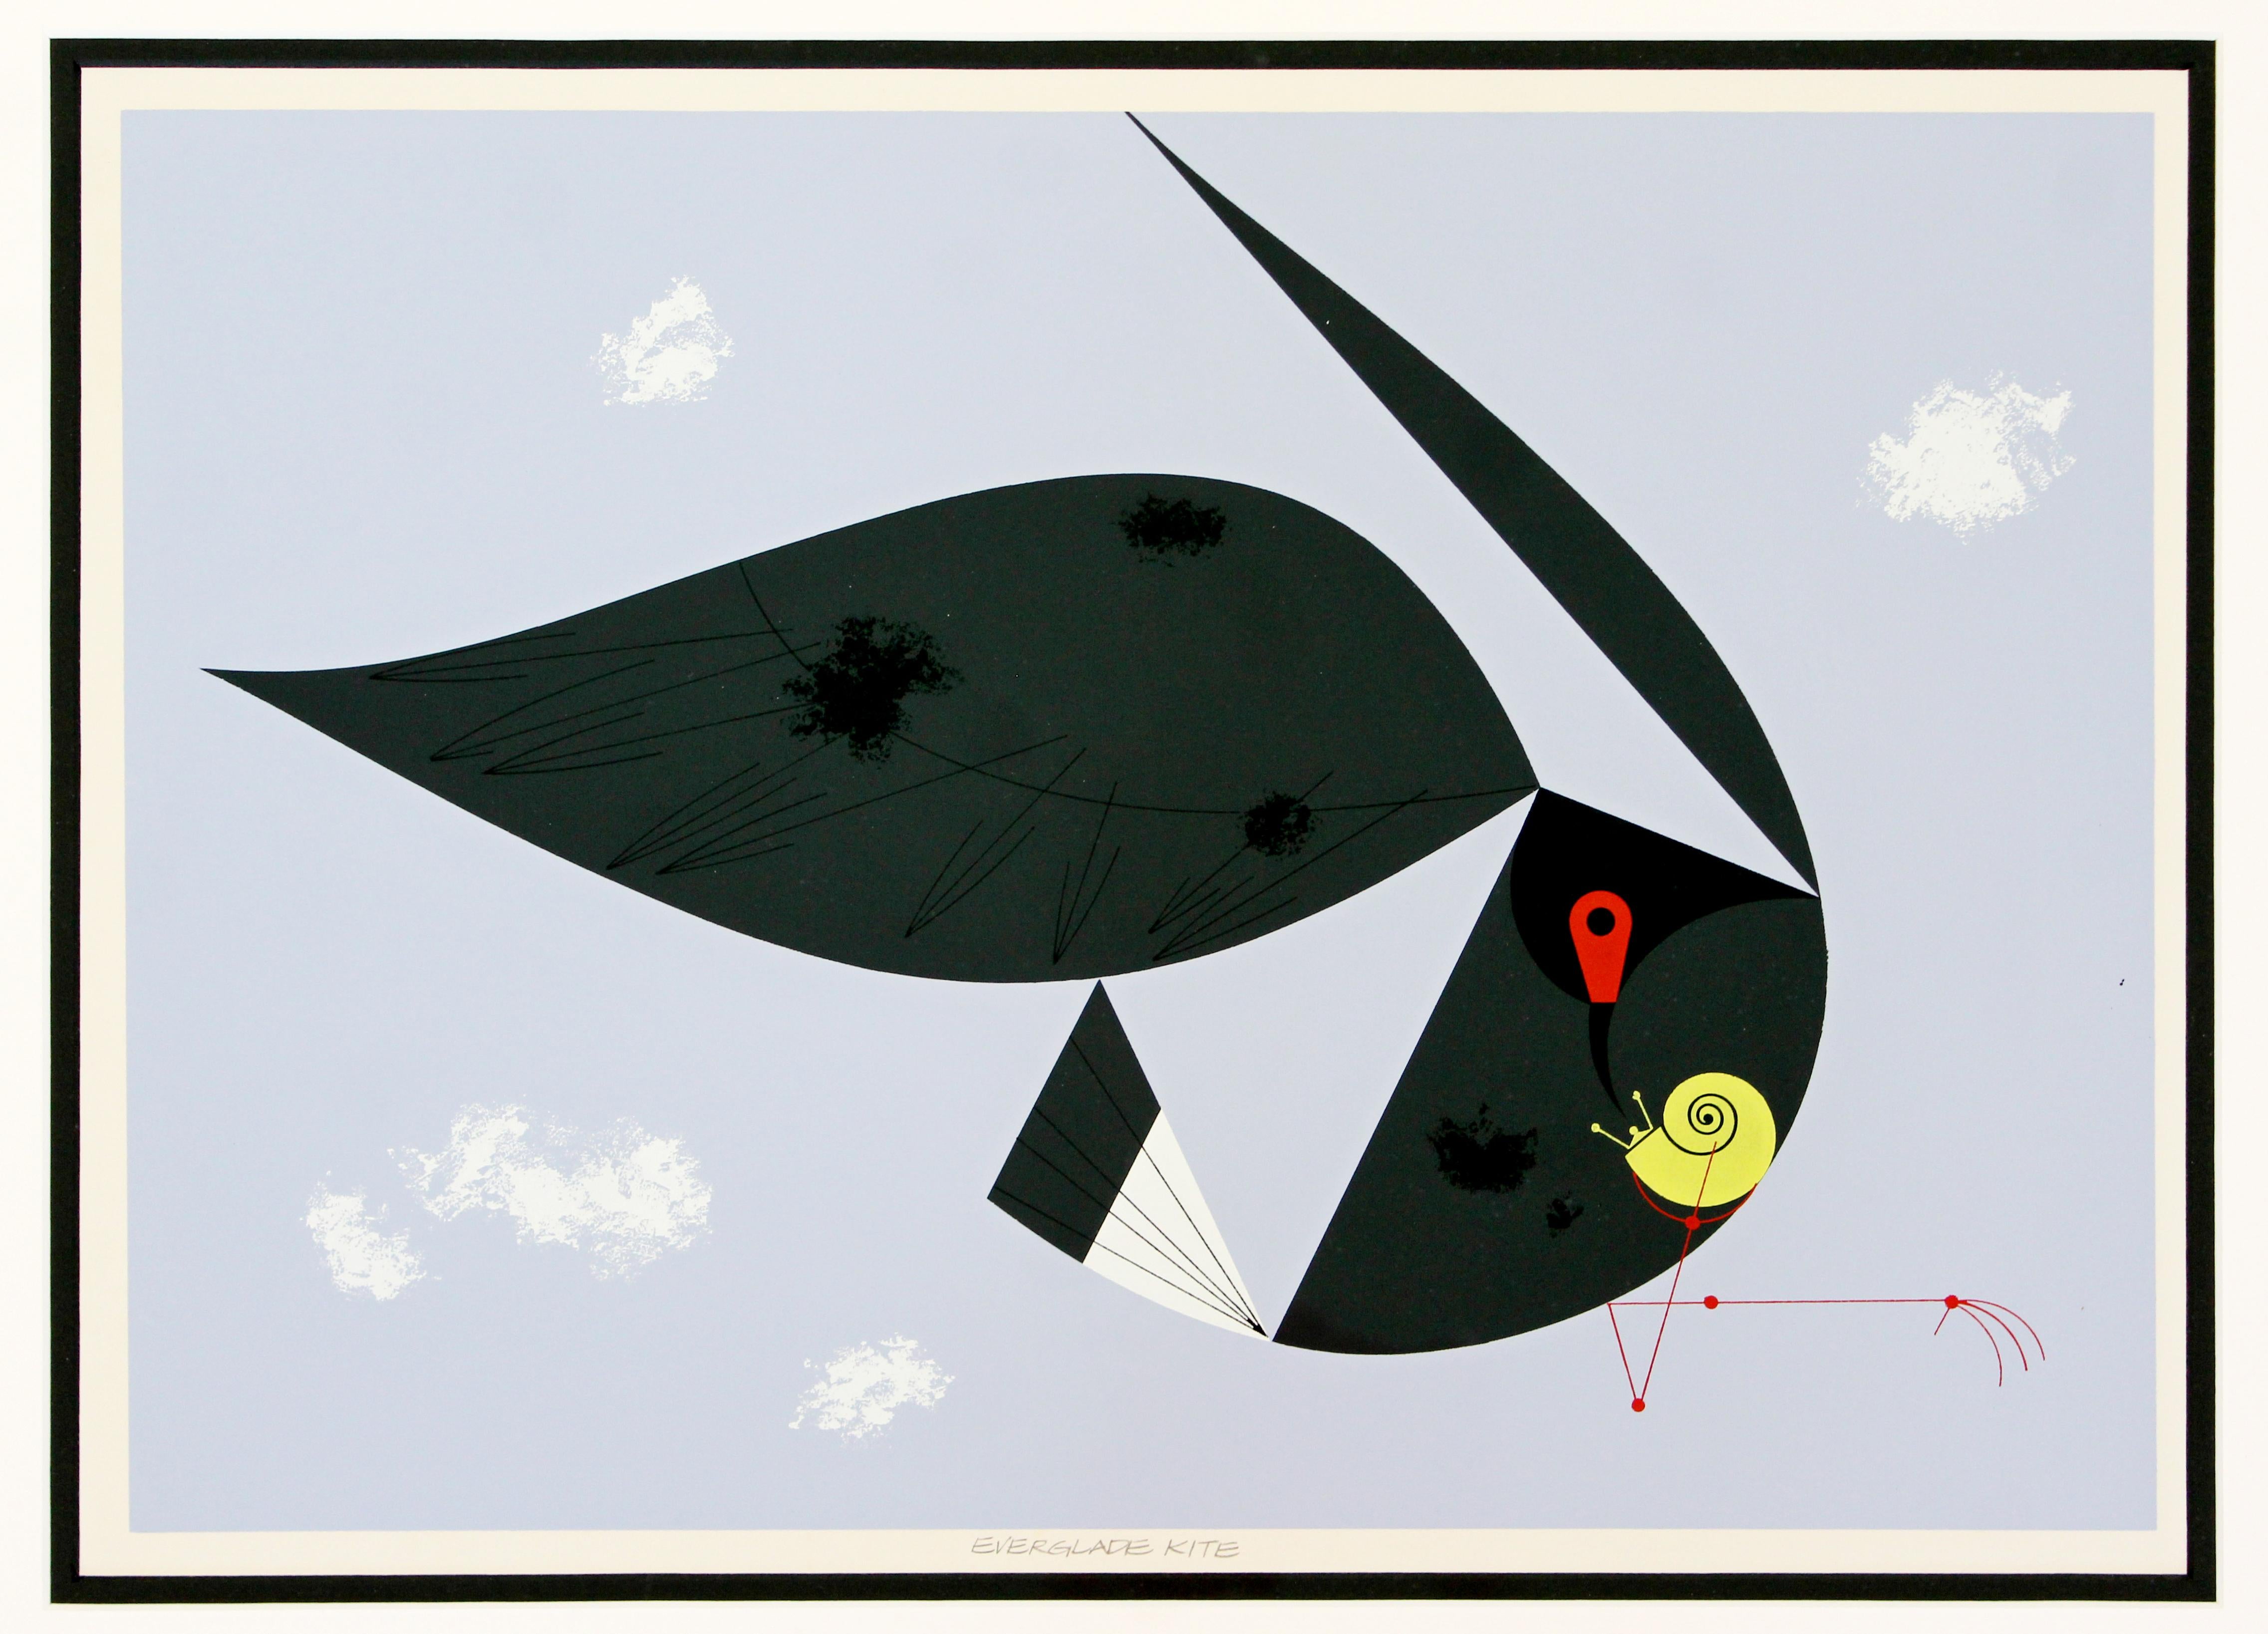 For your consideration is a lovely, framed, estate stamped, limited edition of 100 Charley Harper 